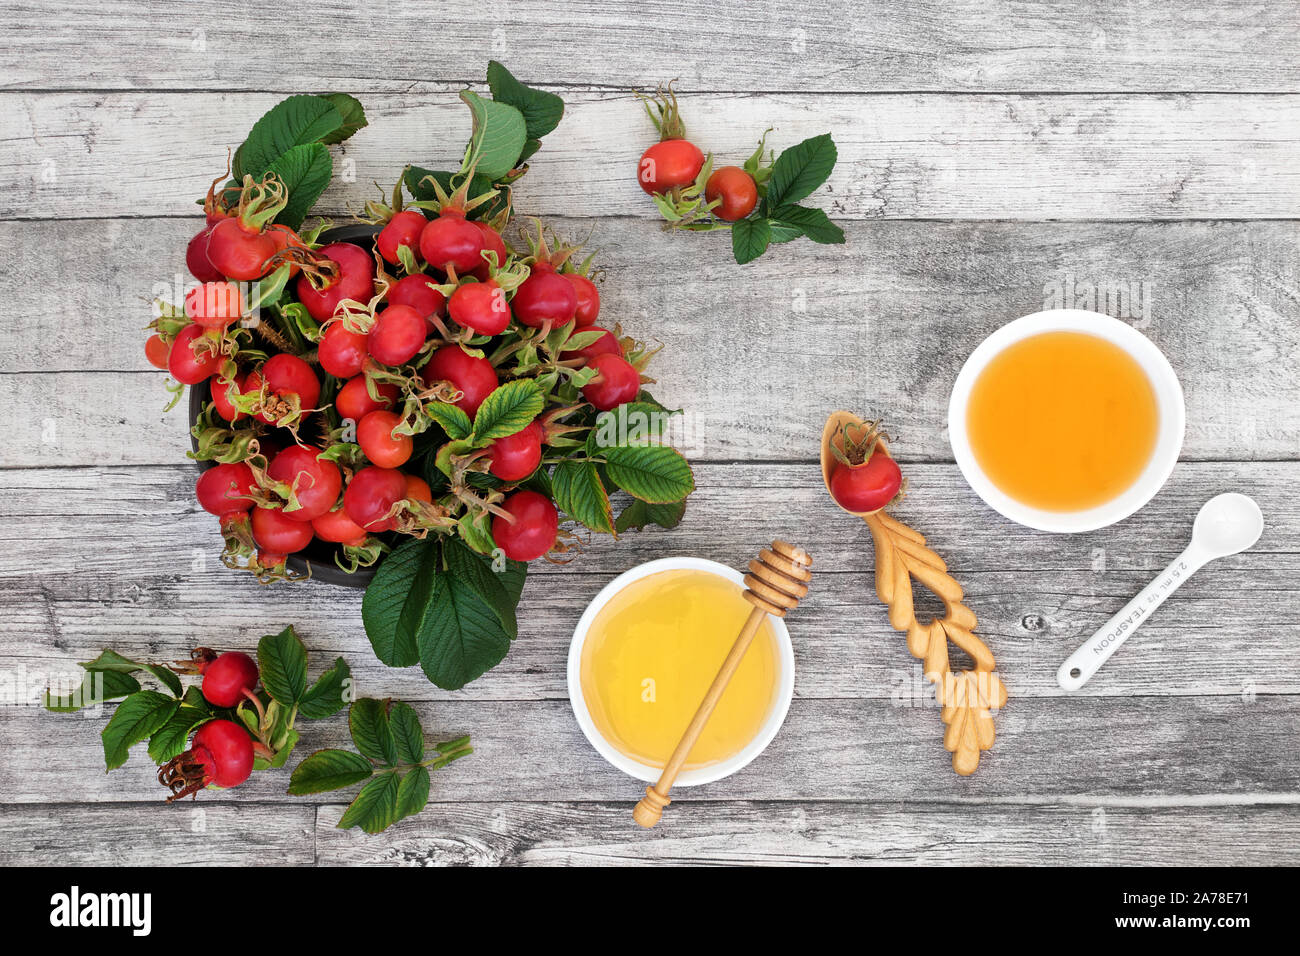 Rosehip berry fruit health food used in herbal medicine for cold and flu remedy drink with honey and apple cider vinegar. High in antioxidants. Stock Photo